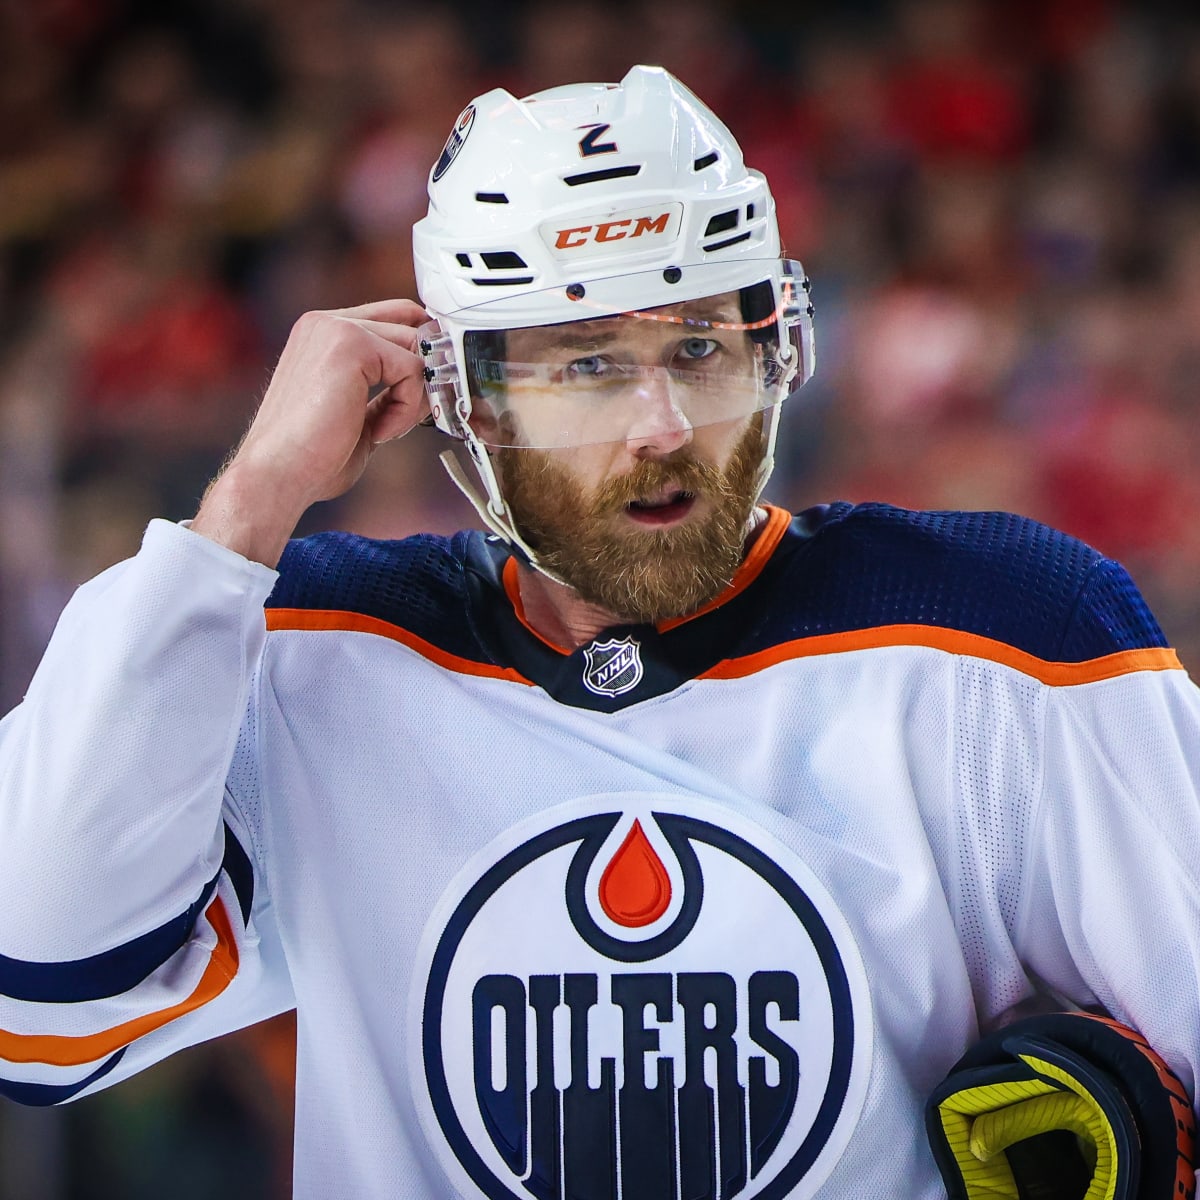 Oilers: Duncan Keith will get his first chance to prove himself